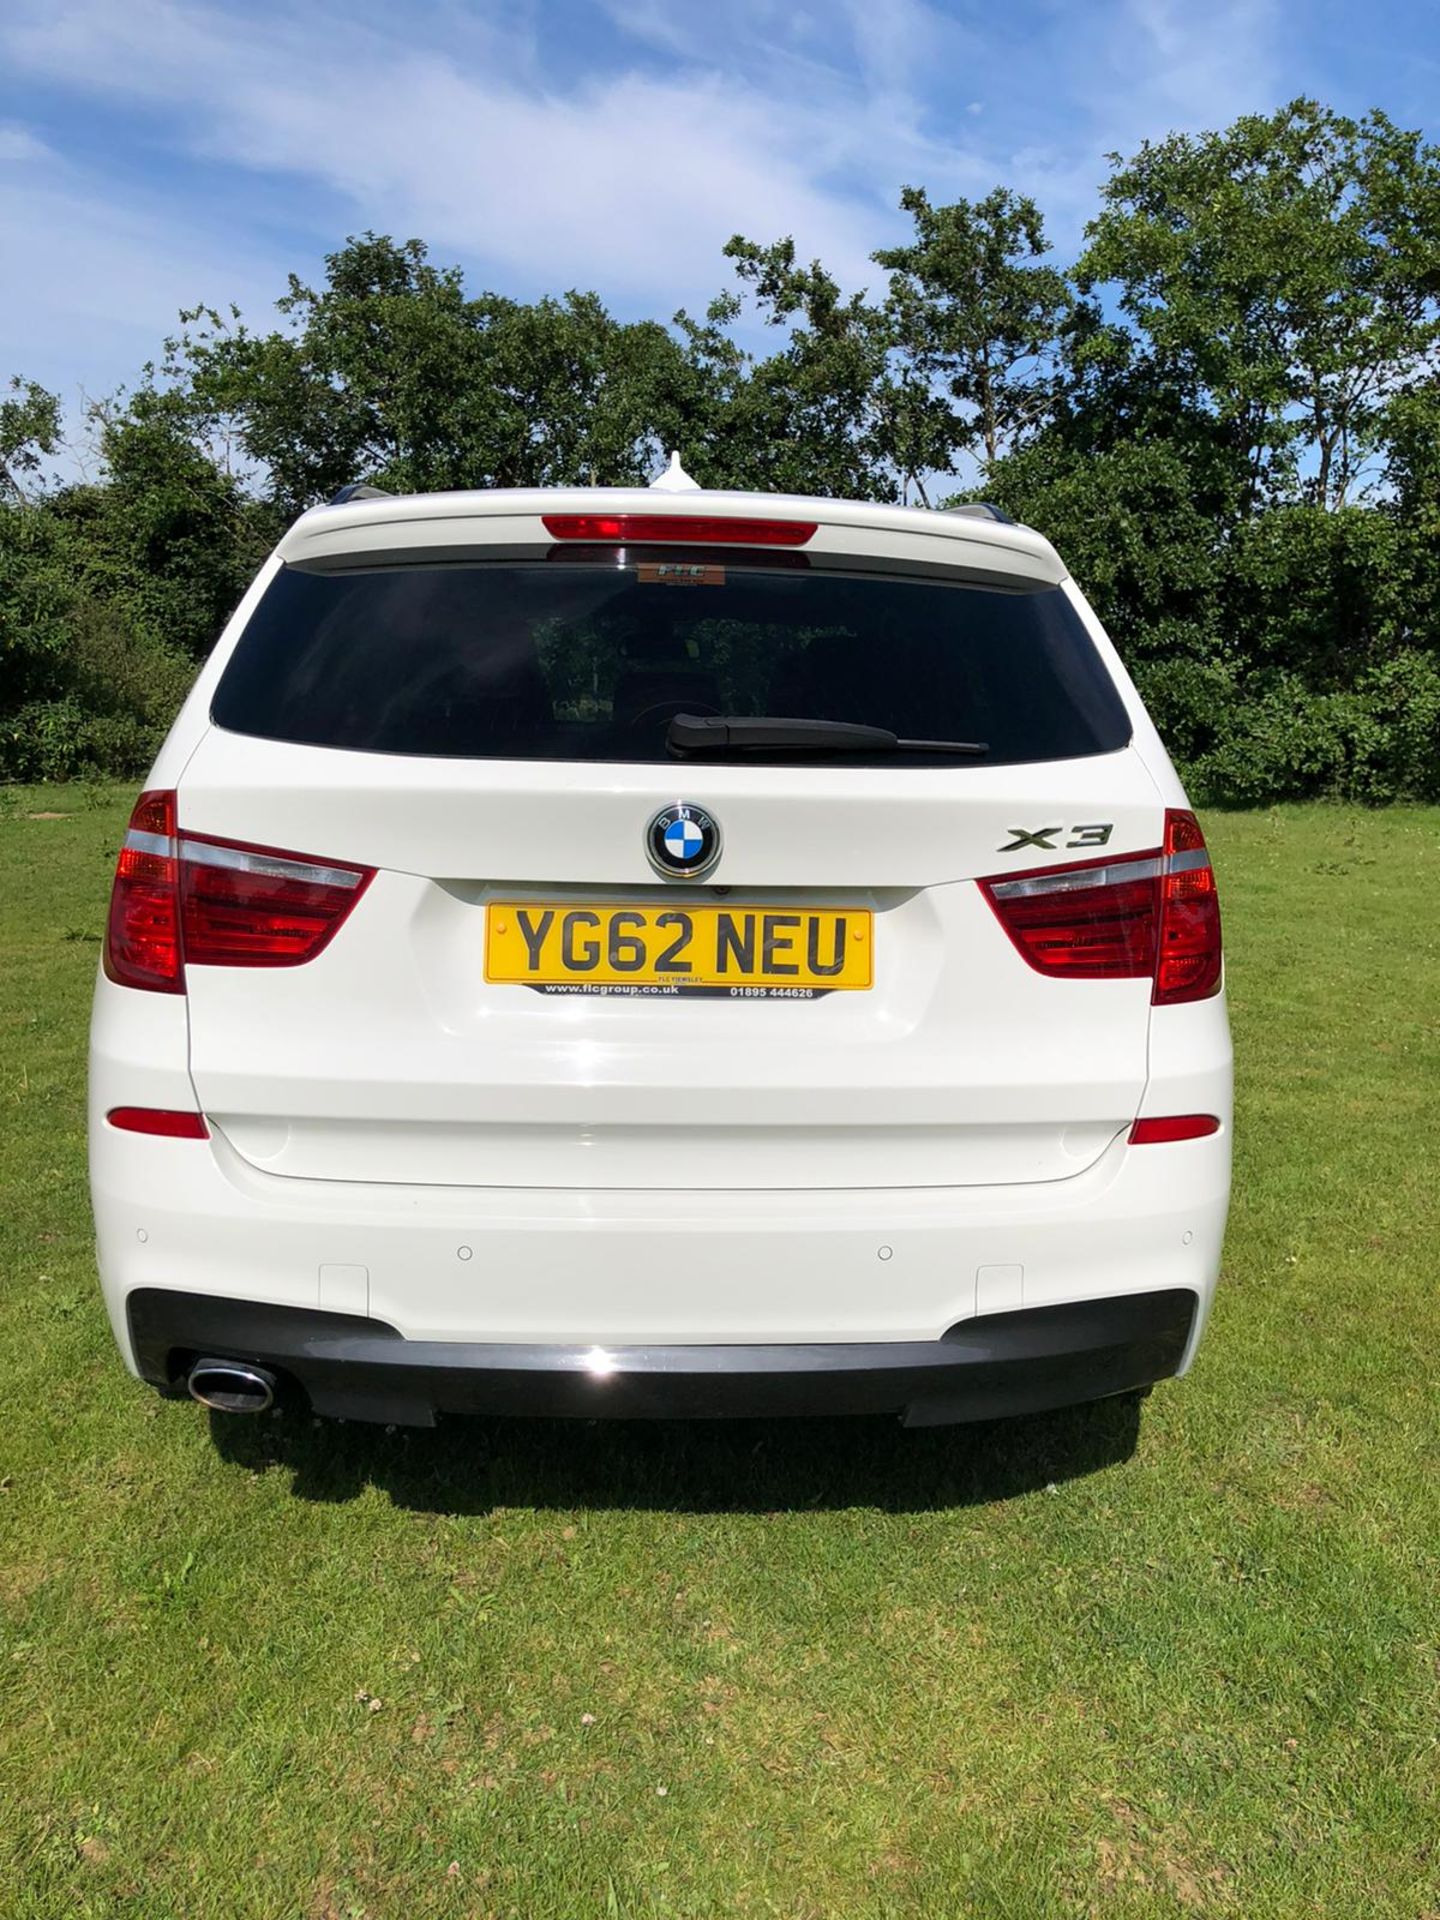 2012/62 REG BMW X3 XDRIVE 20D M SPORT 2.0 DIESEL AUTOMATIC 185 BHP, SHOWING 2 FORMER KEEPERS - Image 4 of 16